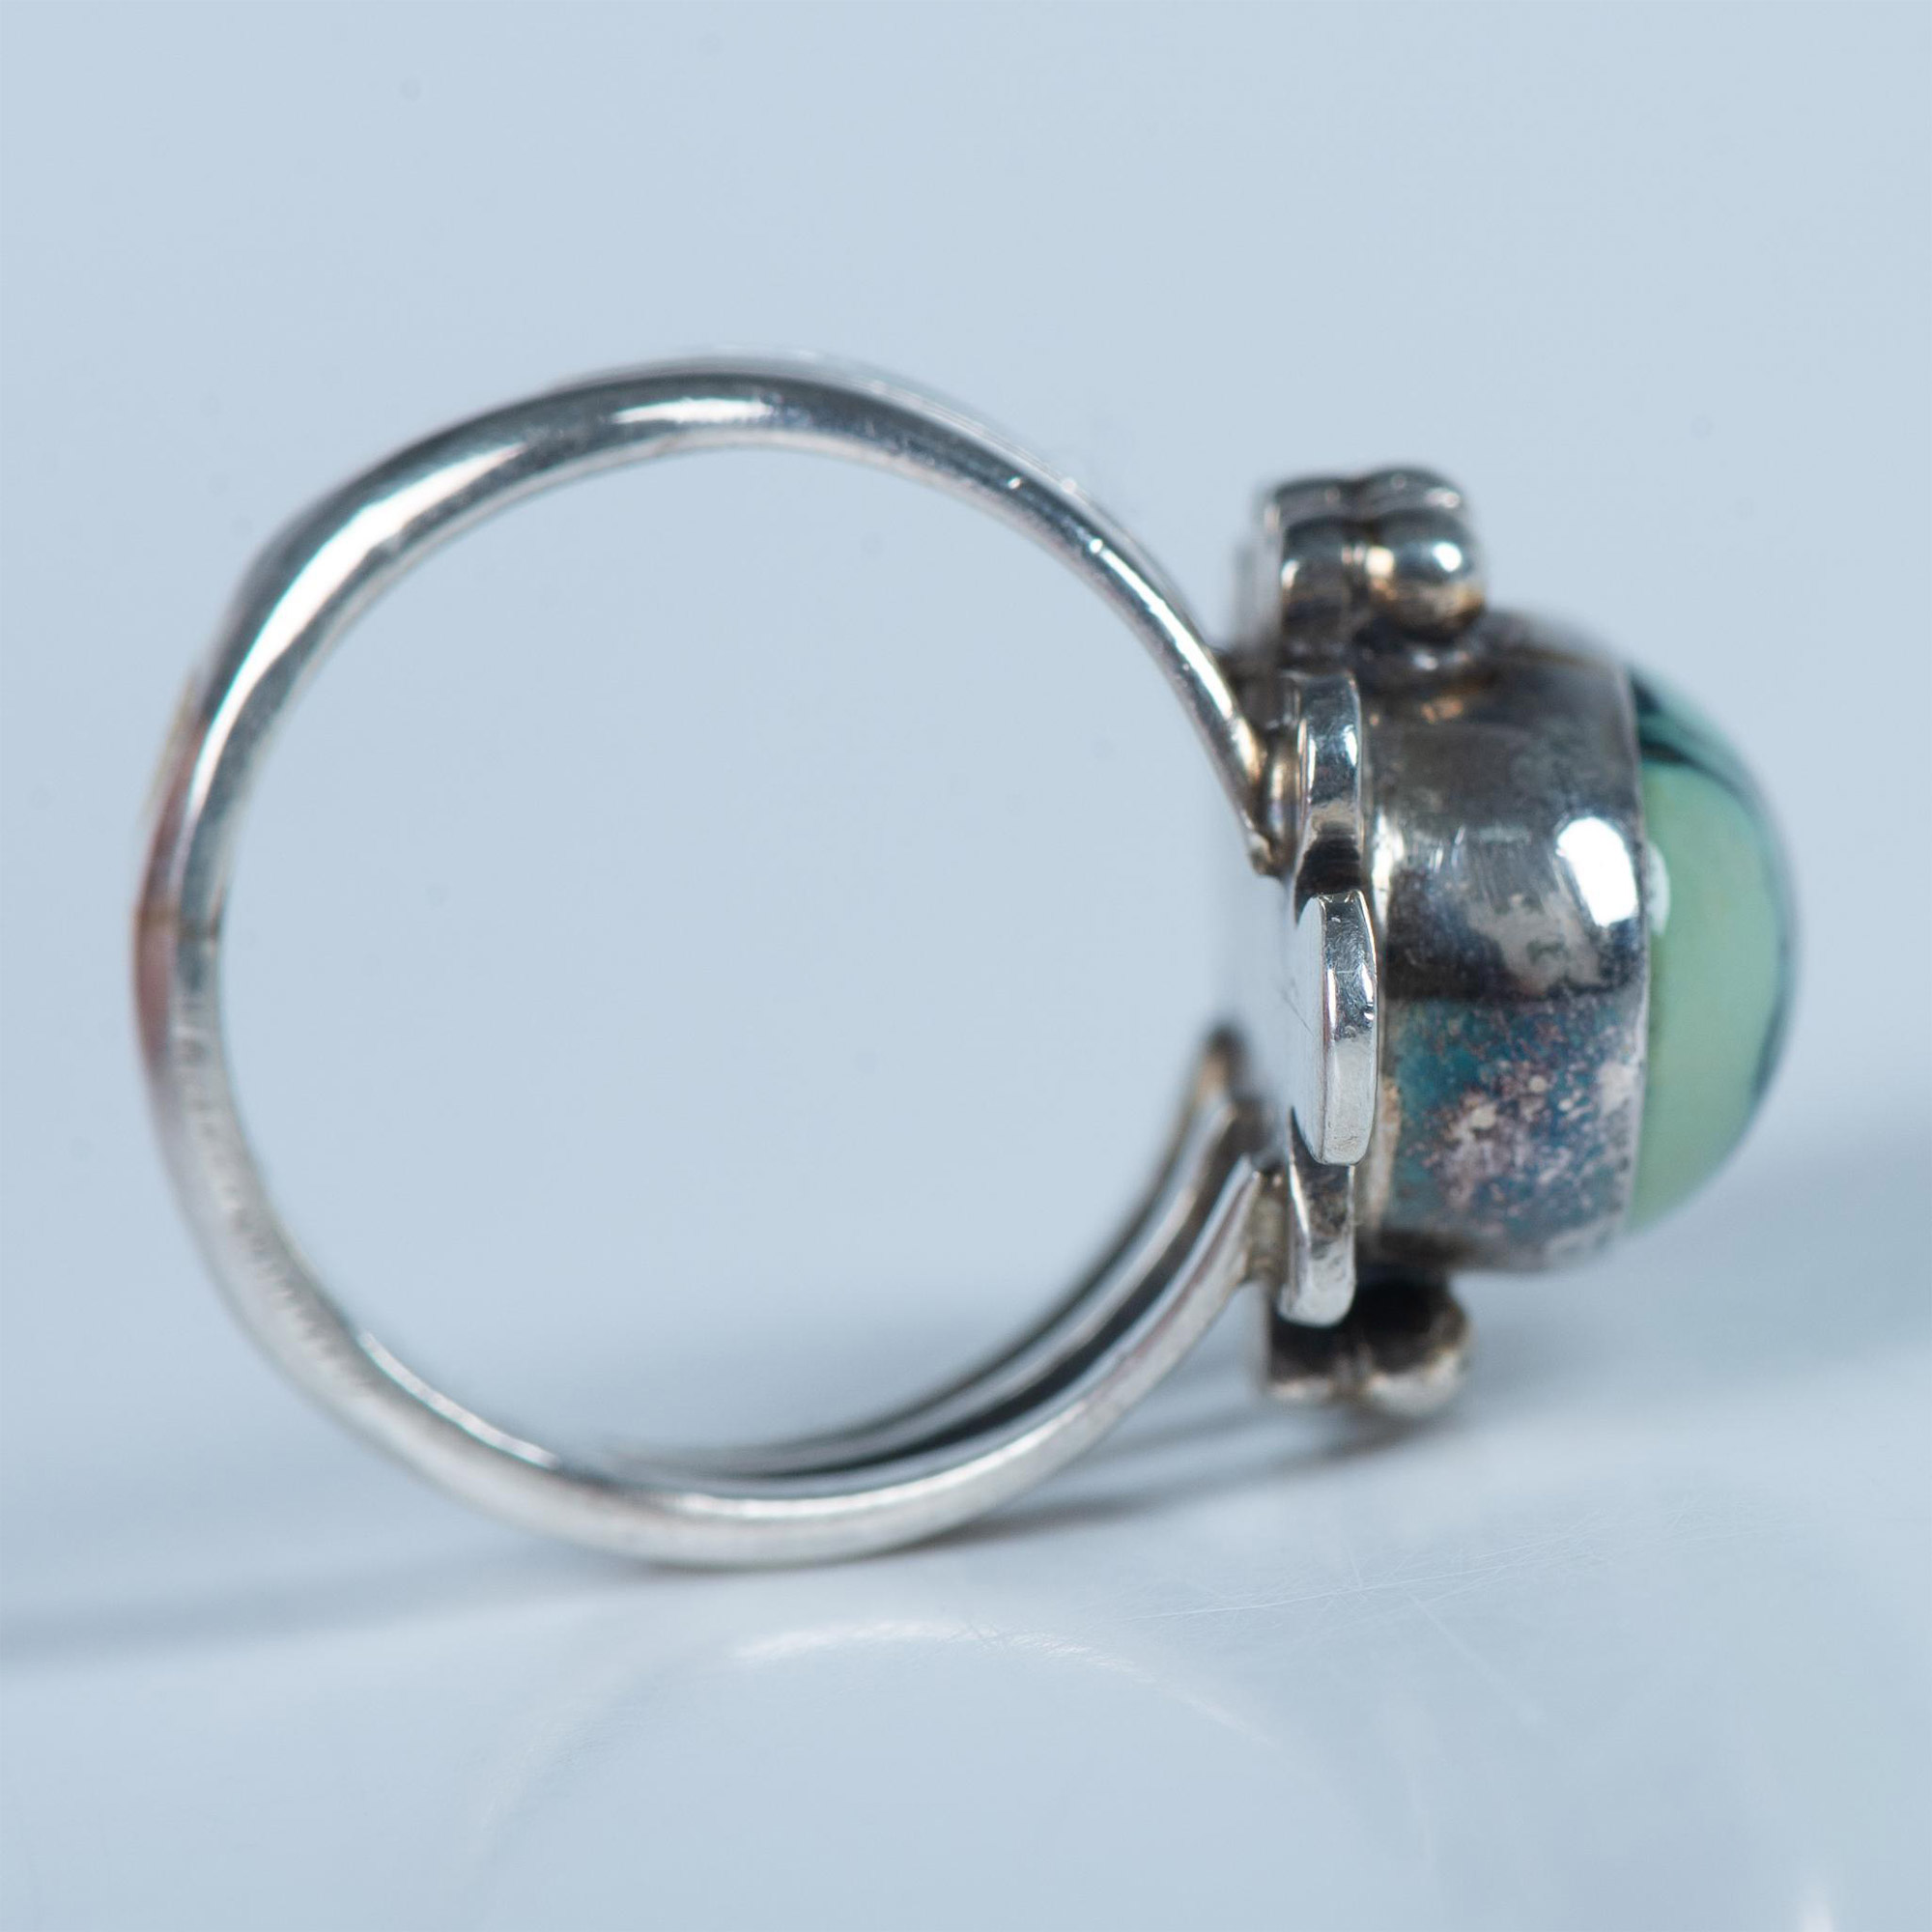 Handmade Native American Sterling Silver & Turquoise Ring - Image 5 of 5